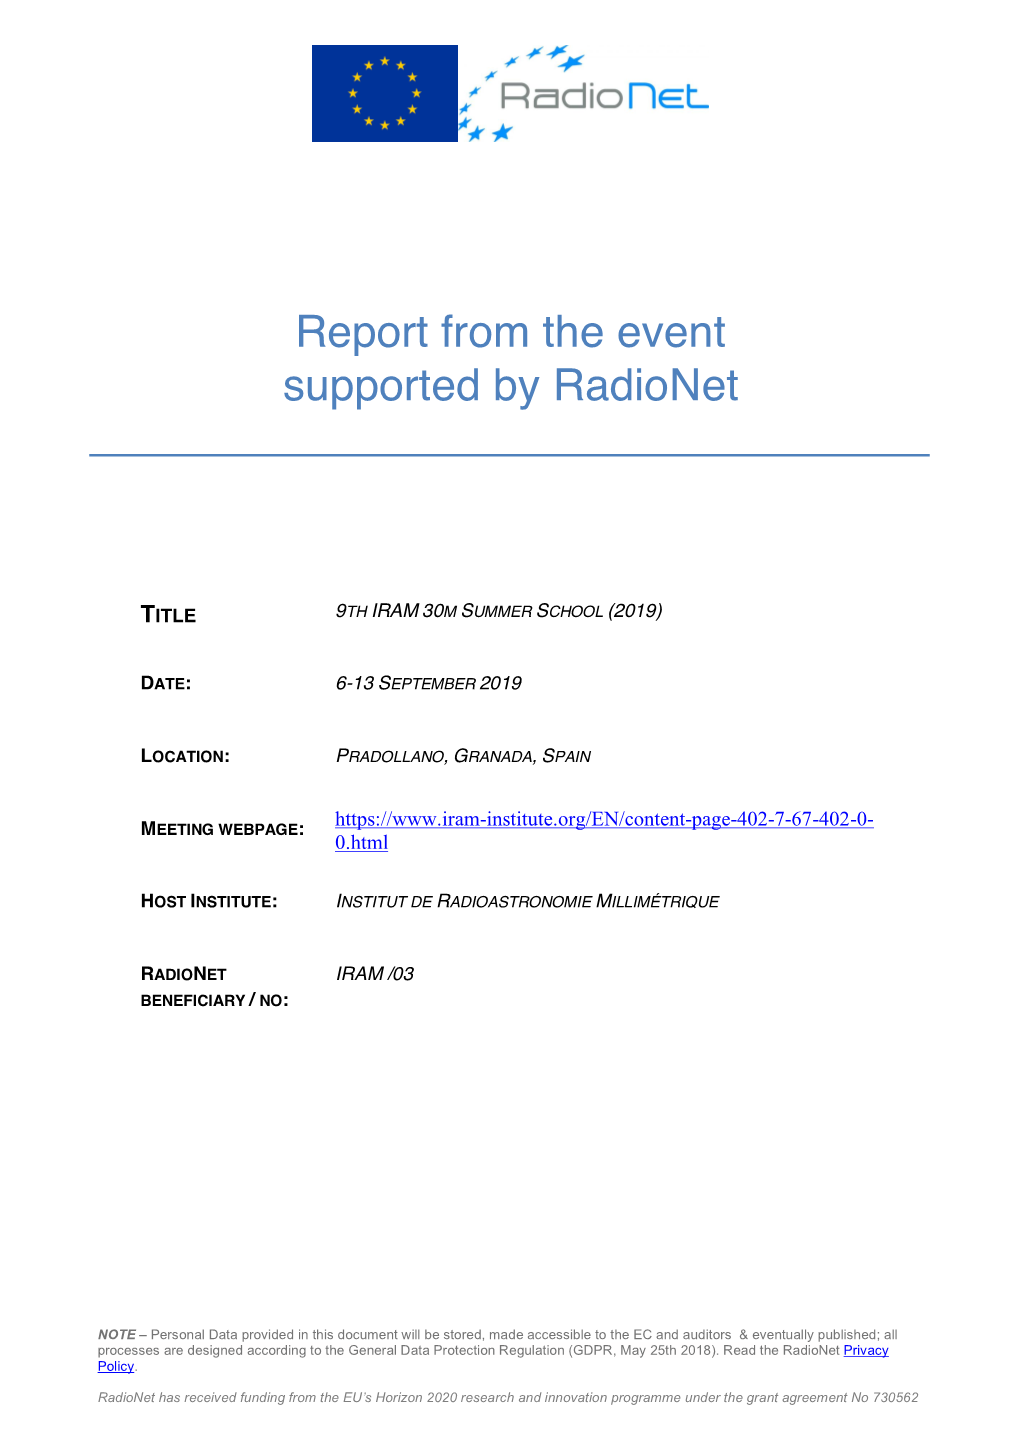 Report from the Event Supported by Radionet